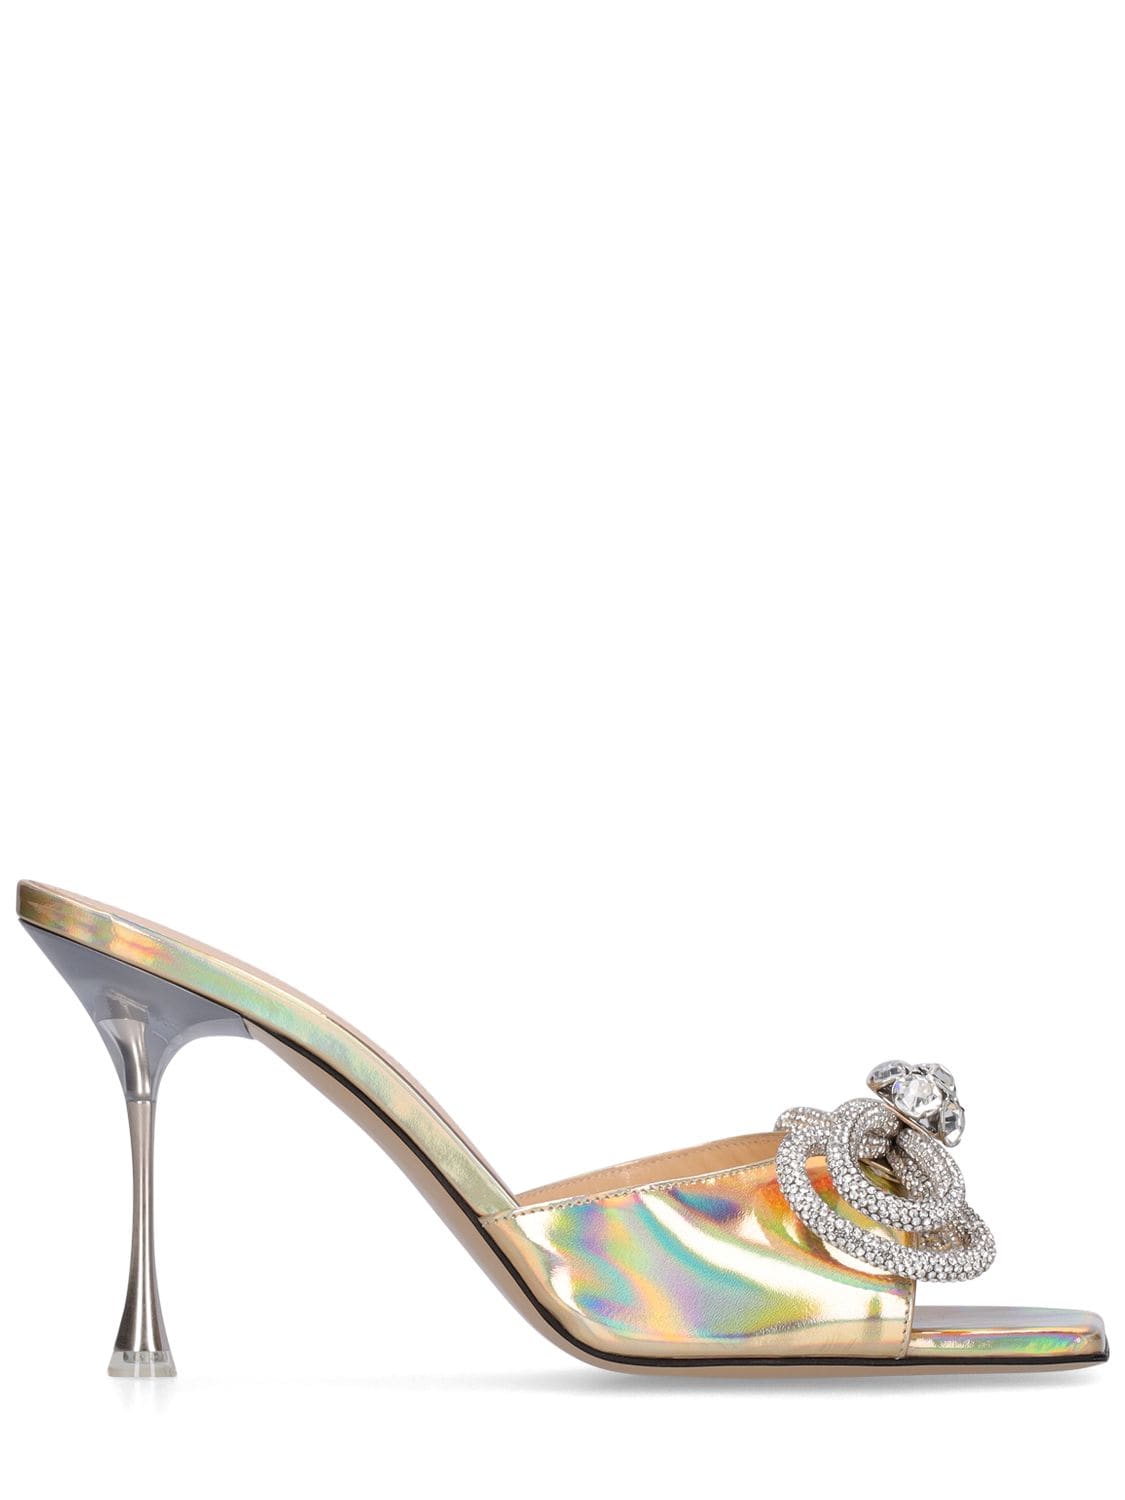 MACH & MACH 95mm Double Bow Iridescent Leather Mules